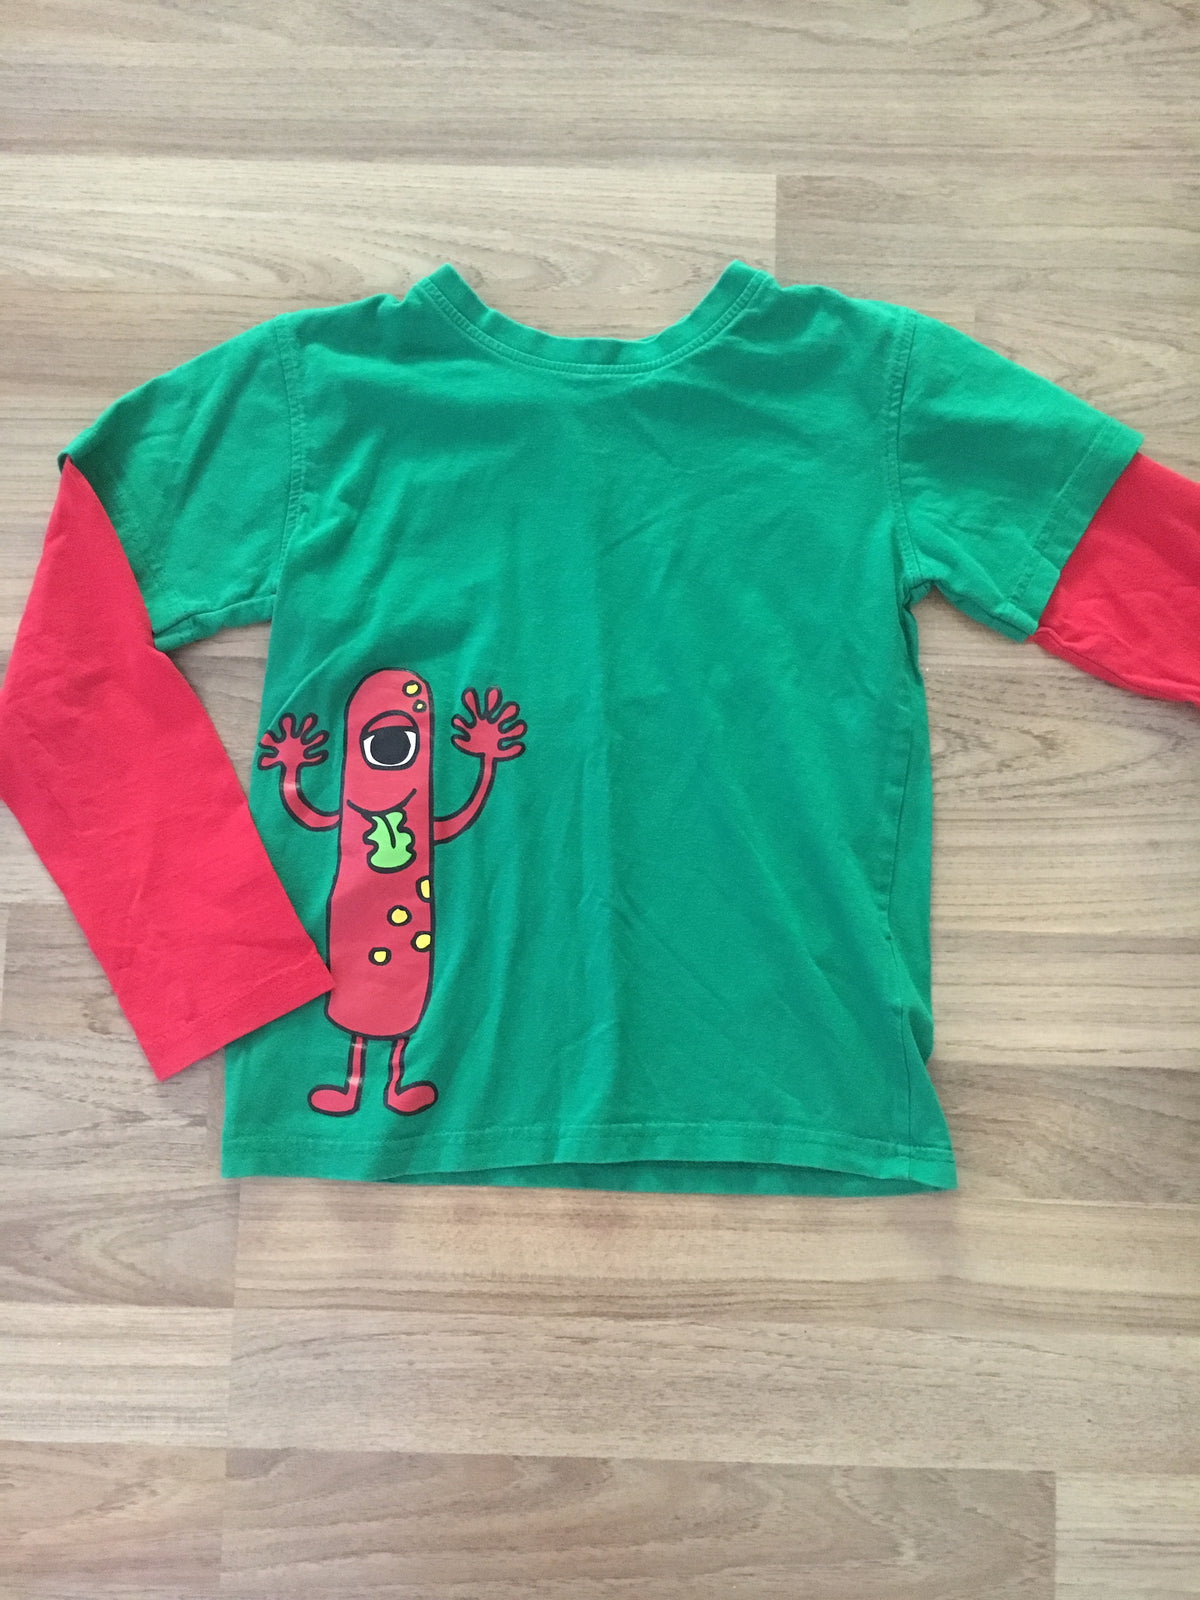 Graphic Top (Boys Size 7-8)